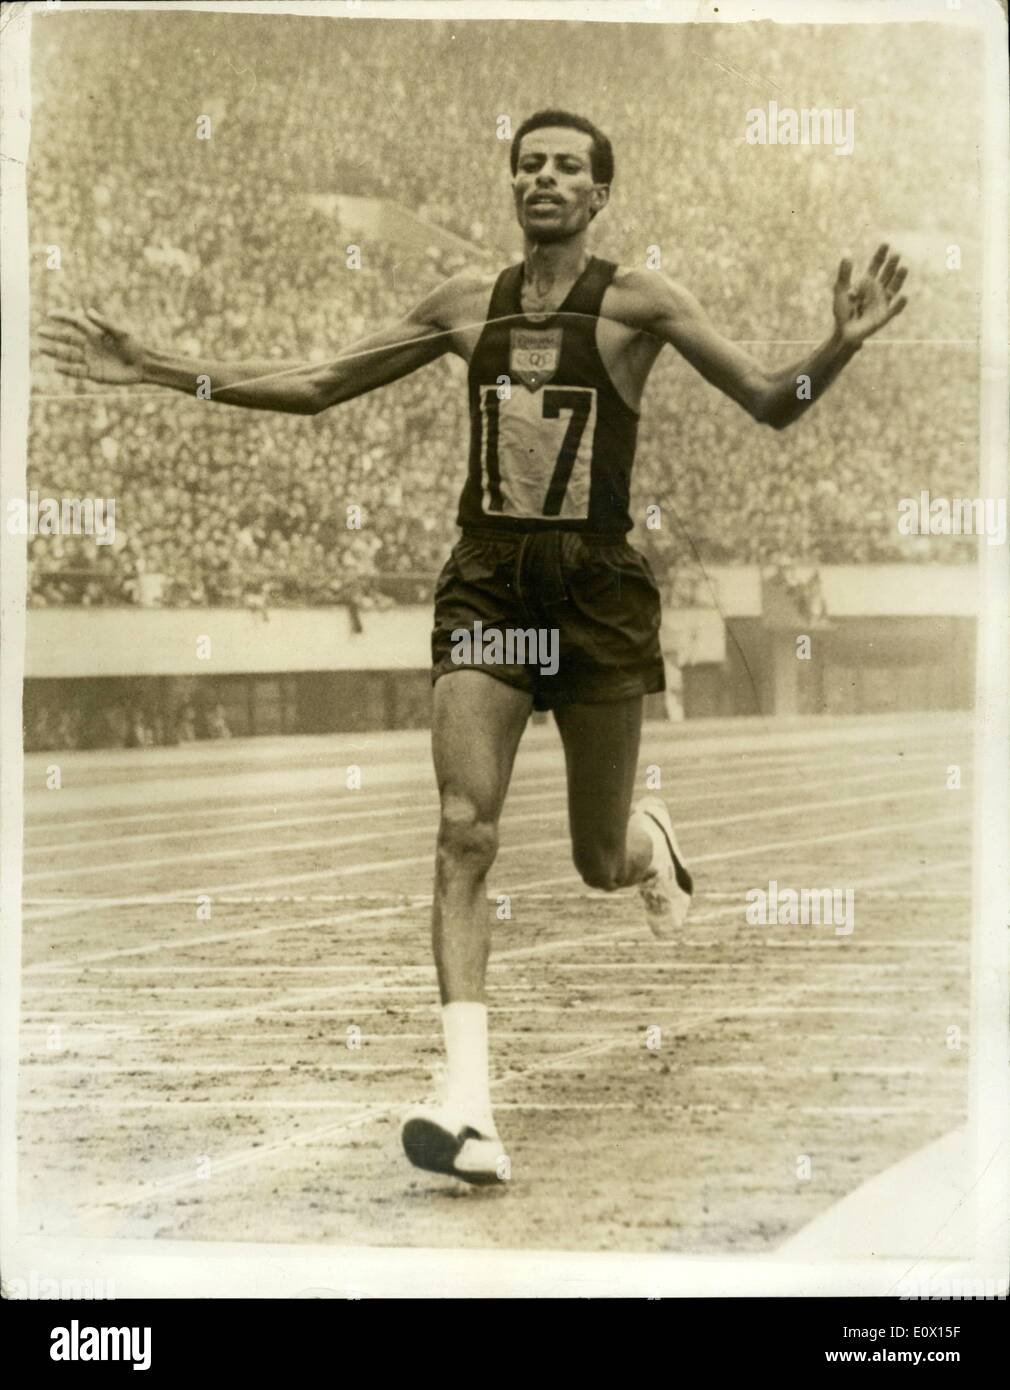 Oct. 10, 1964 - Olympic Games In Tokyo. Marathon Gold Medal For Ethiopia. Photo Shows:- A. Abebe Bikila of Ethiopia seen breasting the tape - to win the Marathon event in a new Olympic record time of 2hr. 12 mins. 11.2 secs. Stock Photo